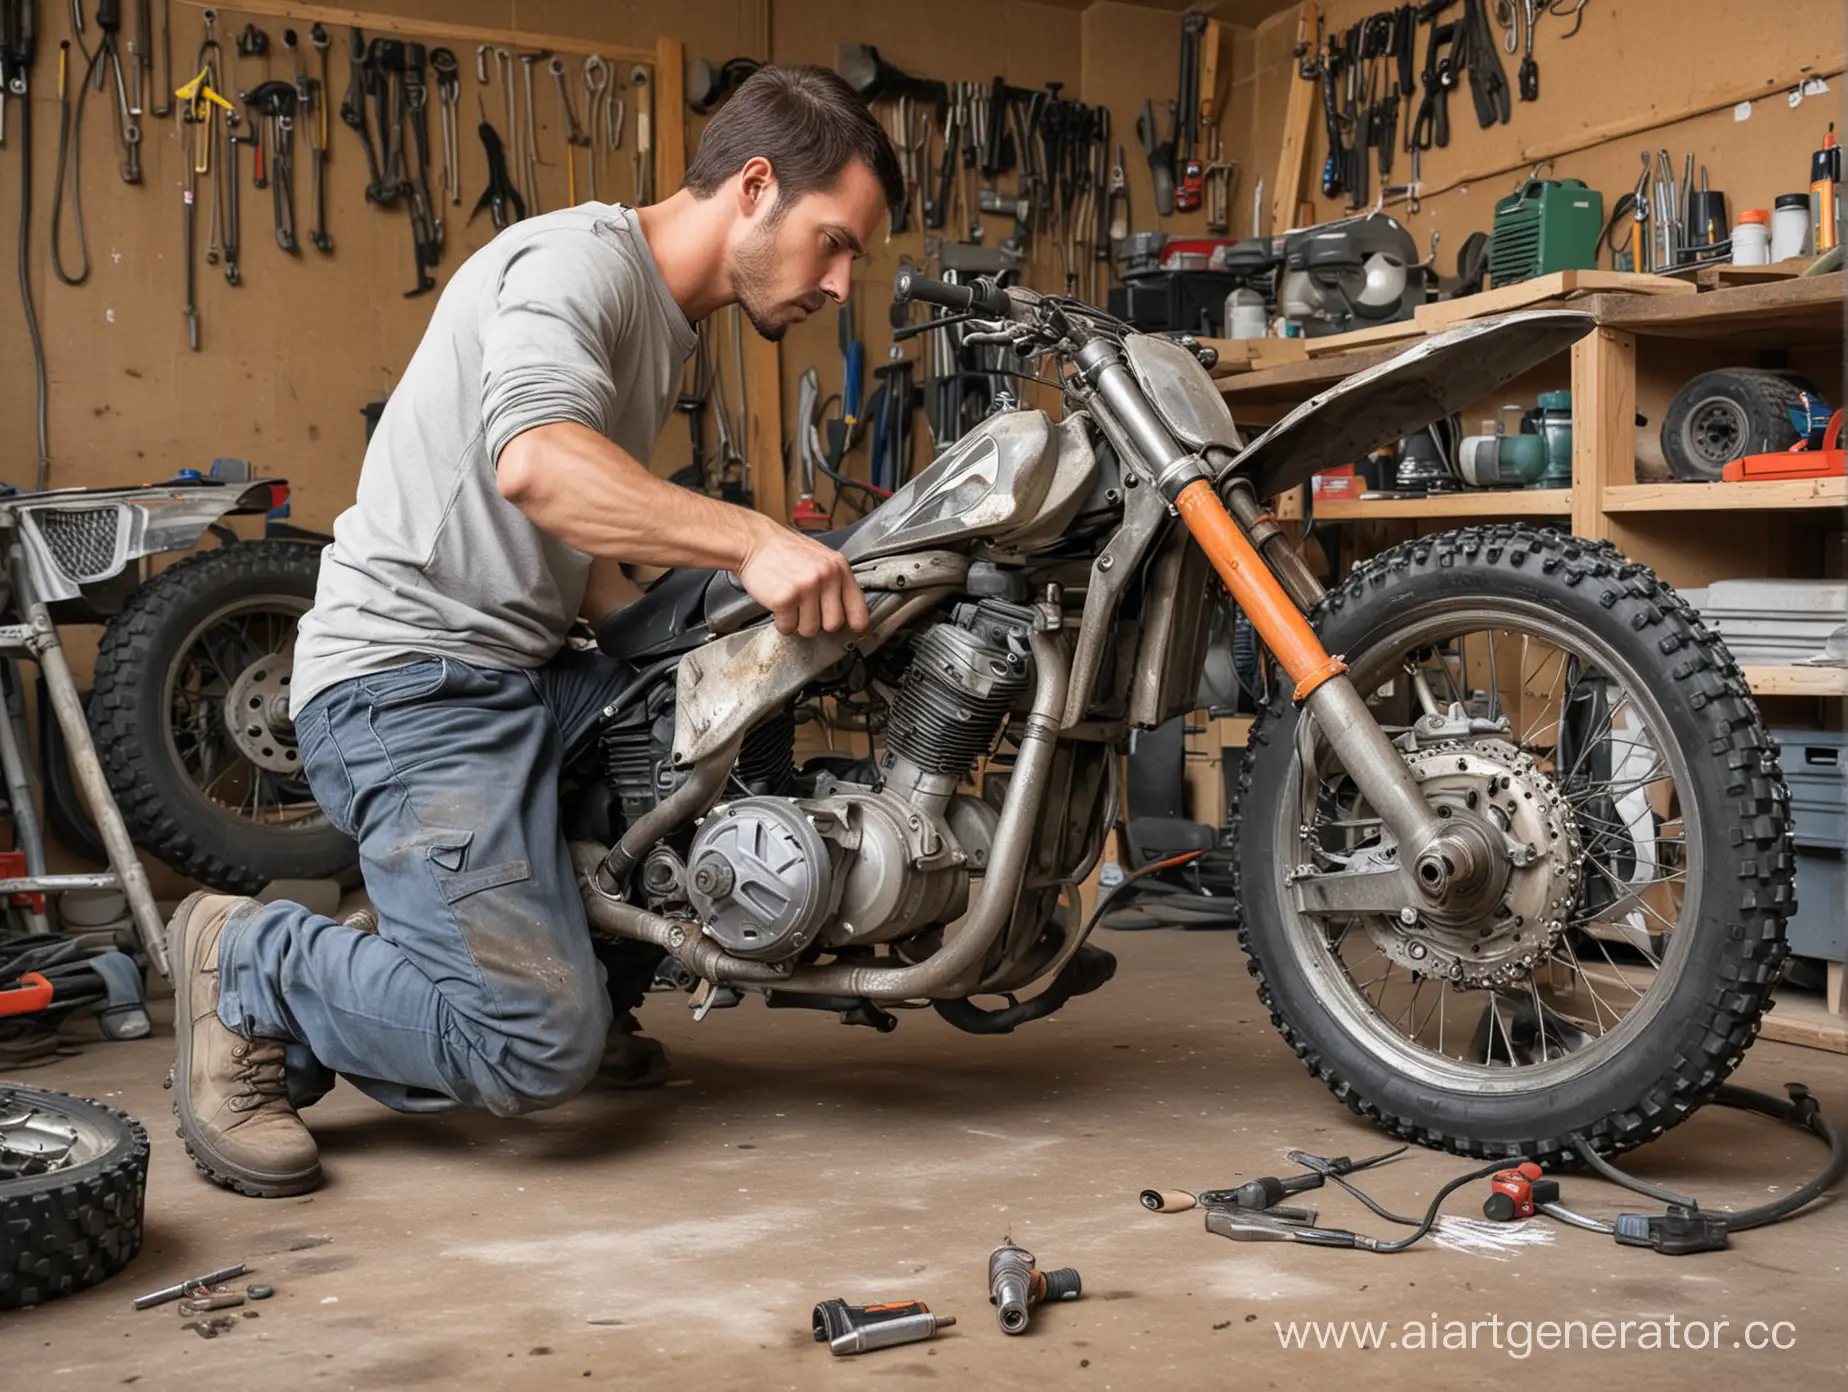 Mechanic-Repairing-Motocross-Motorcycle-in-Garage-with-Angle-Grinder